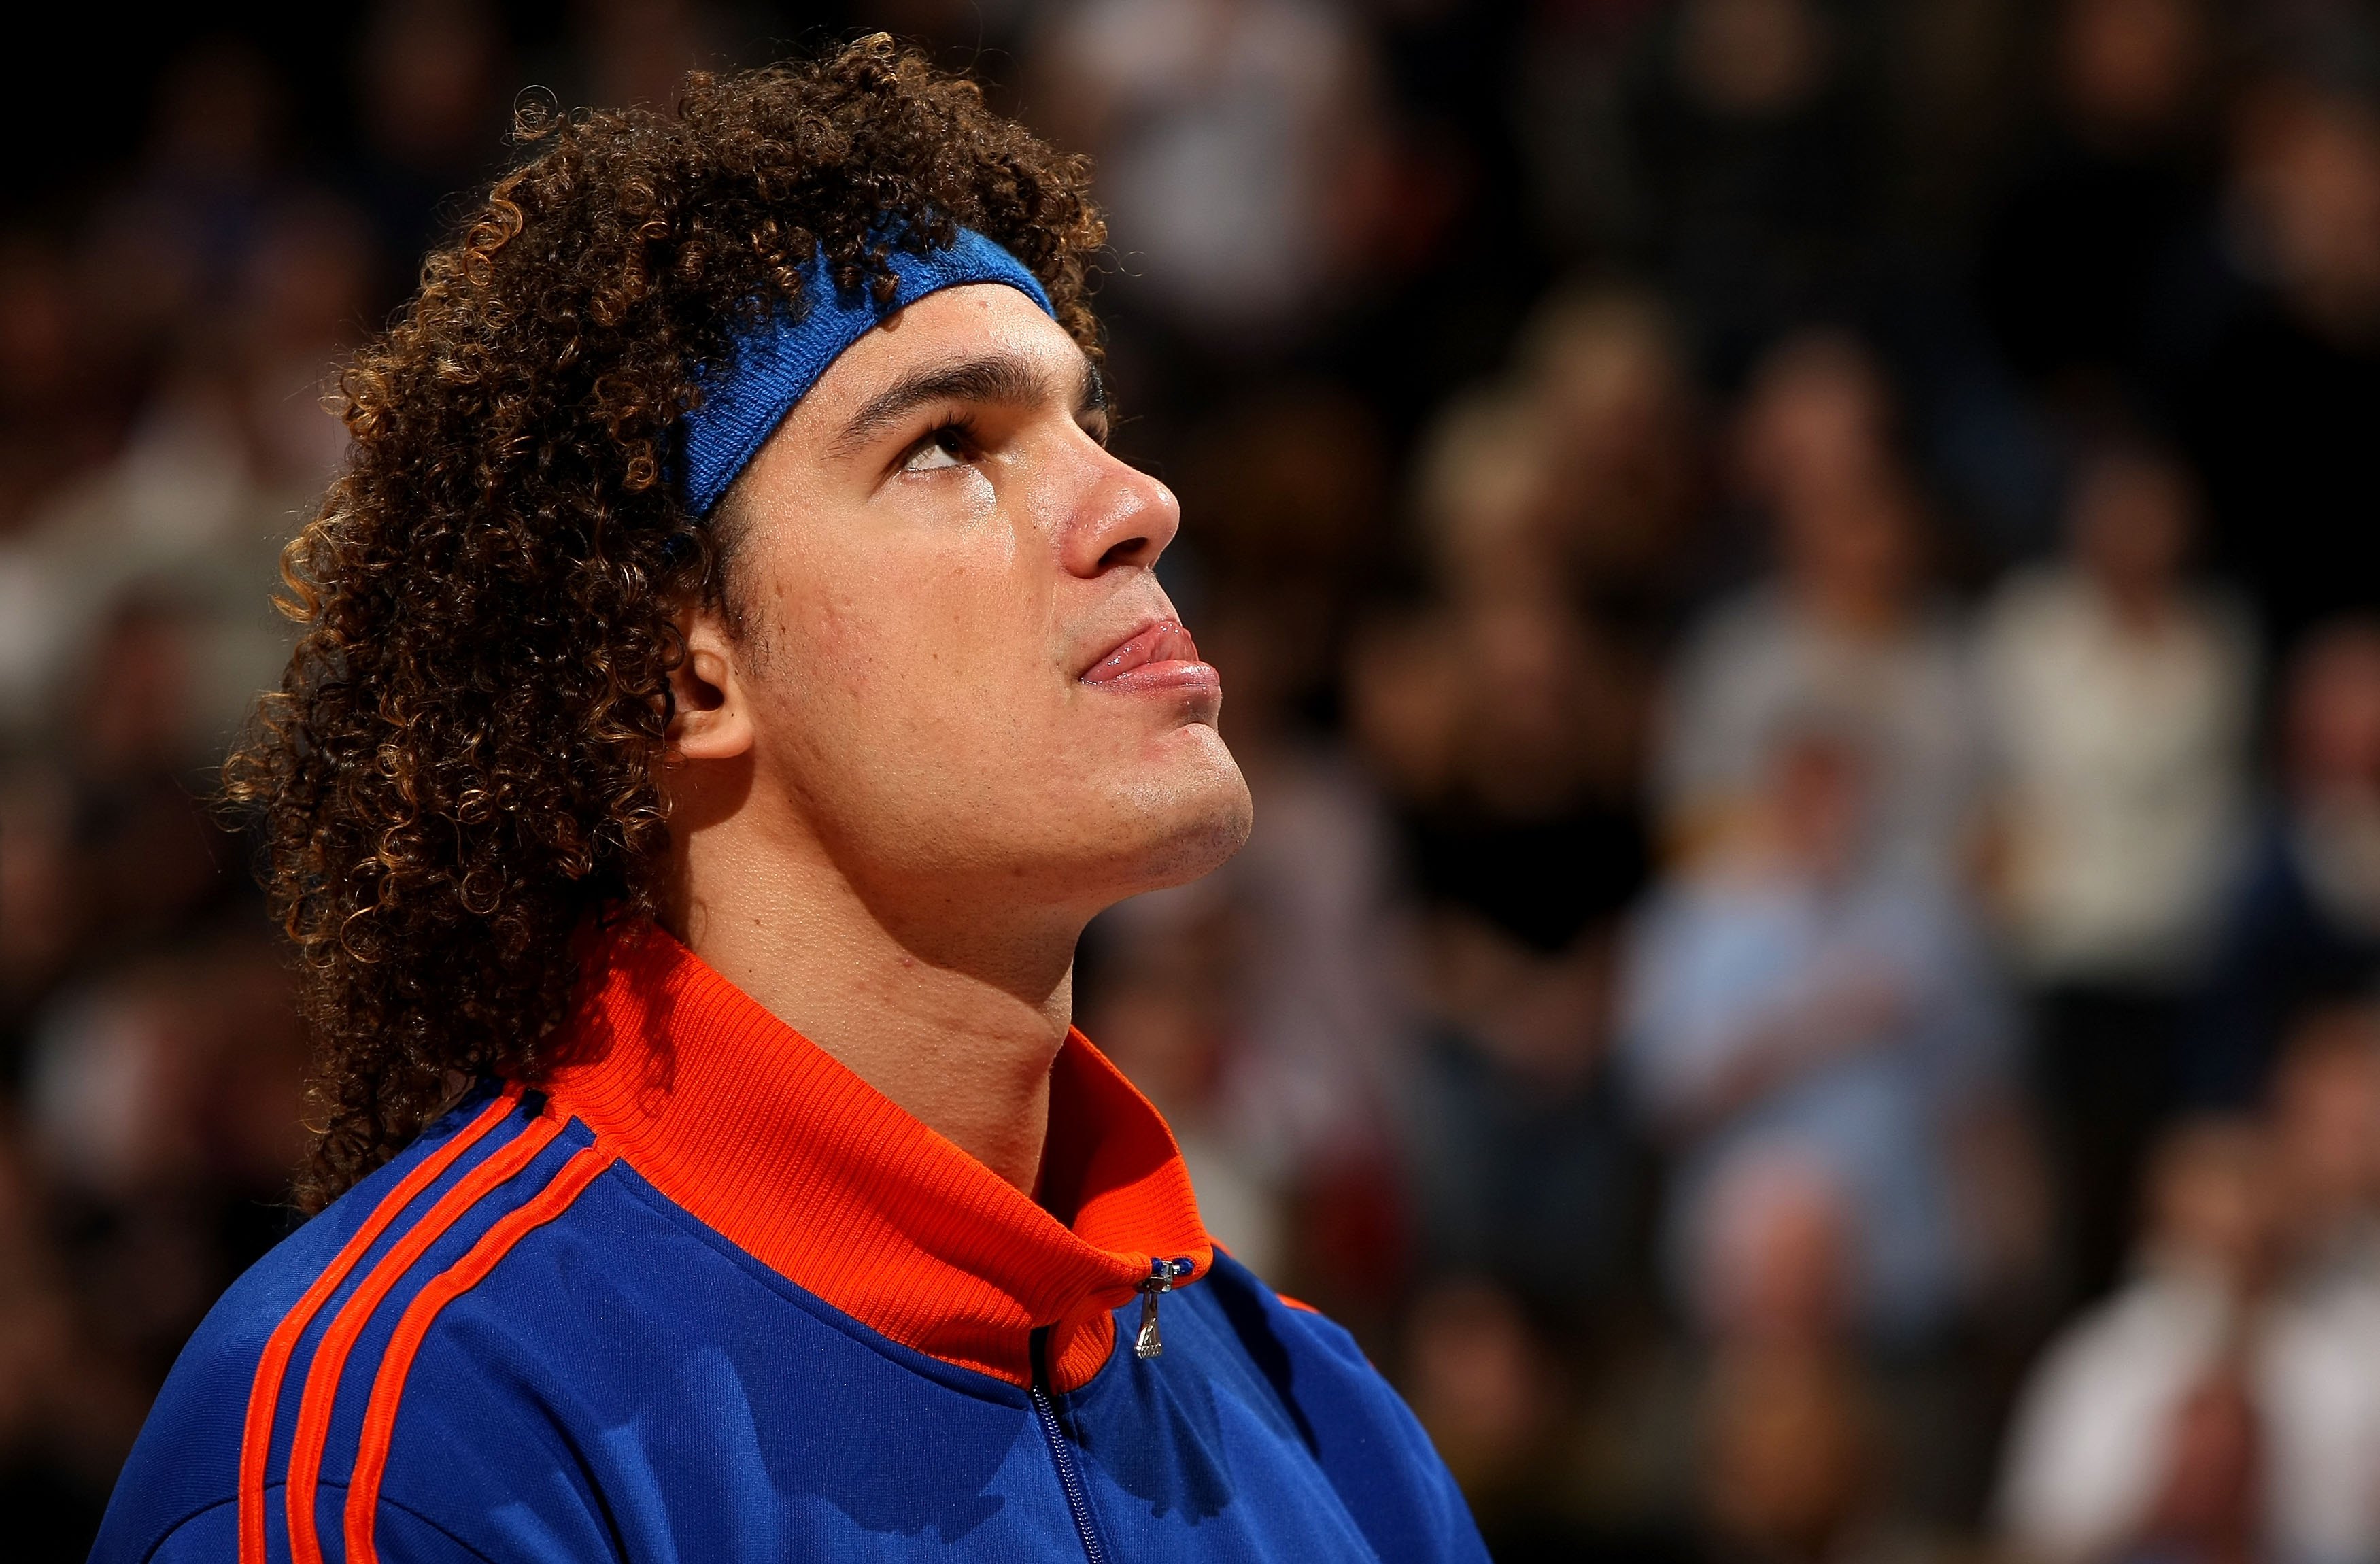 DENVER - JANUARY 08:  Anderson Varejao #17 of the Cleveland Cavaliers looks on during warm ups prior to facing the Denver Nuggets during NBA action at Pepsi Center on January 8, 2010 in Denver, Colorado. The Nuggets defeated the Cavaliers 99-97. NOTE TO U